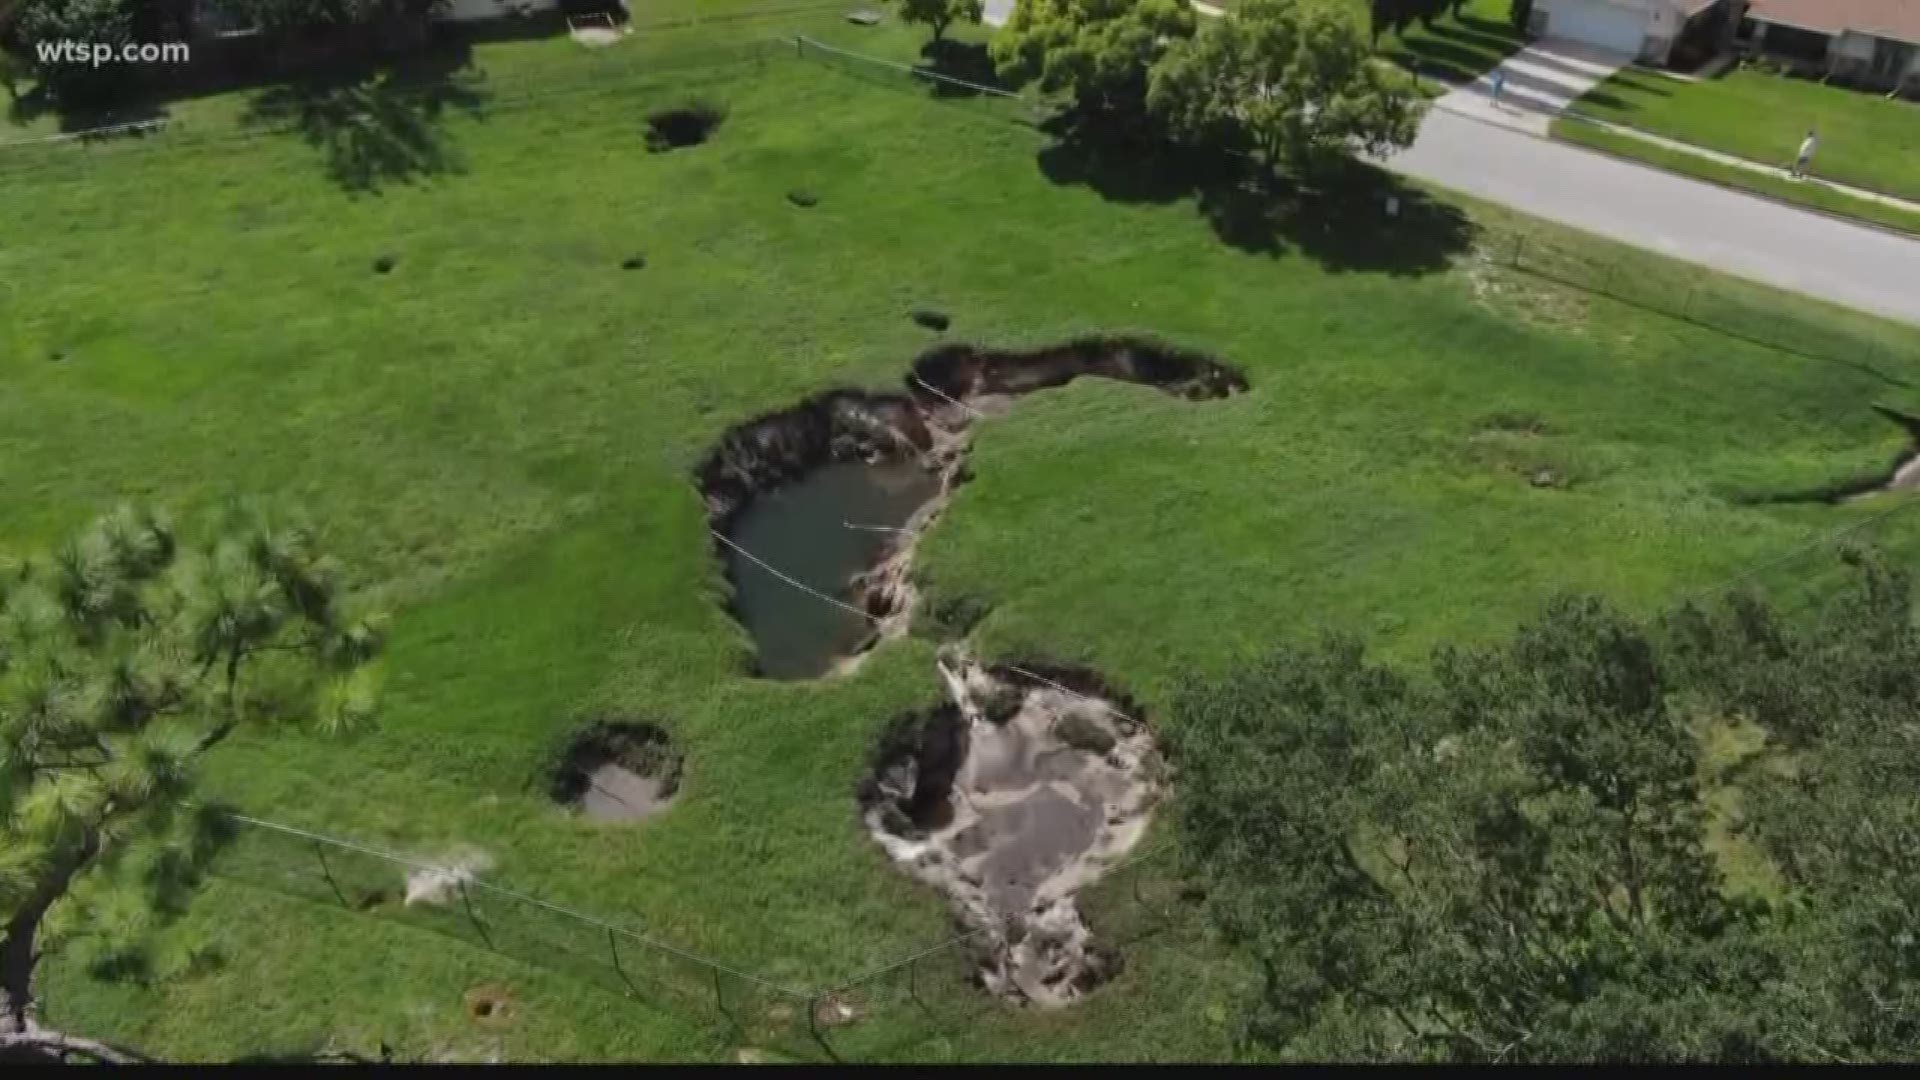 Sinkholes can happen anywhere in Florida, but the geology around Pasco County makes the area especially prone for sinkhole activity.